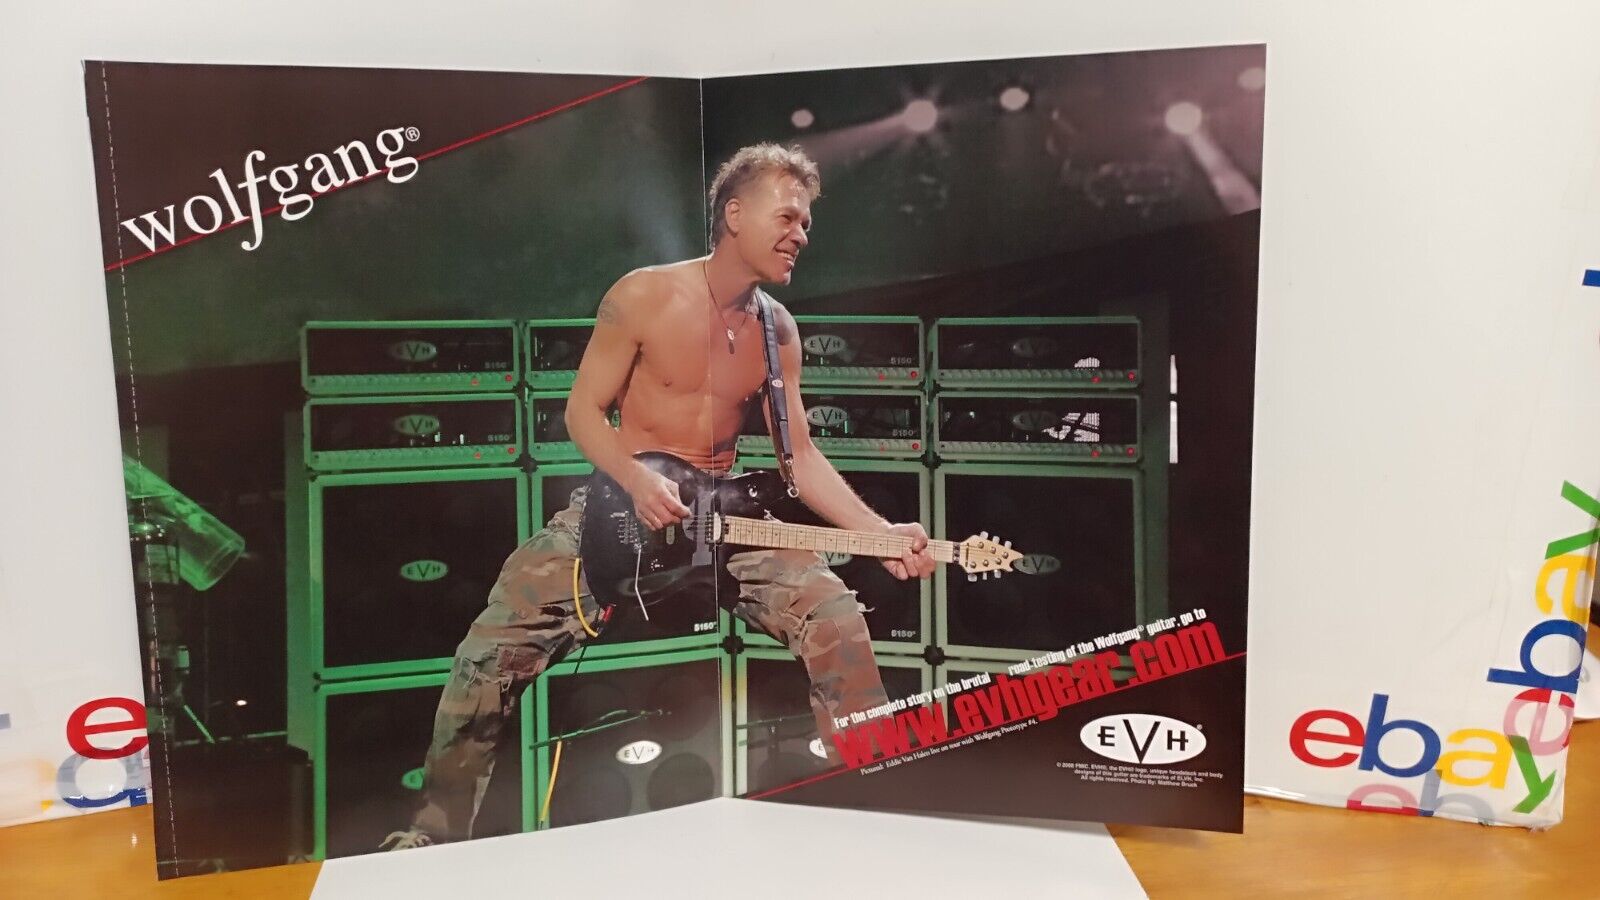 EVH WOLFGANG GUITAR POSTER CENTERFOLD 2 SIDED POSTER  11 X 17   A7